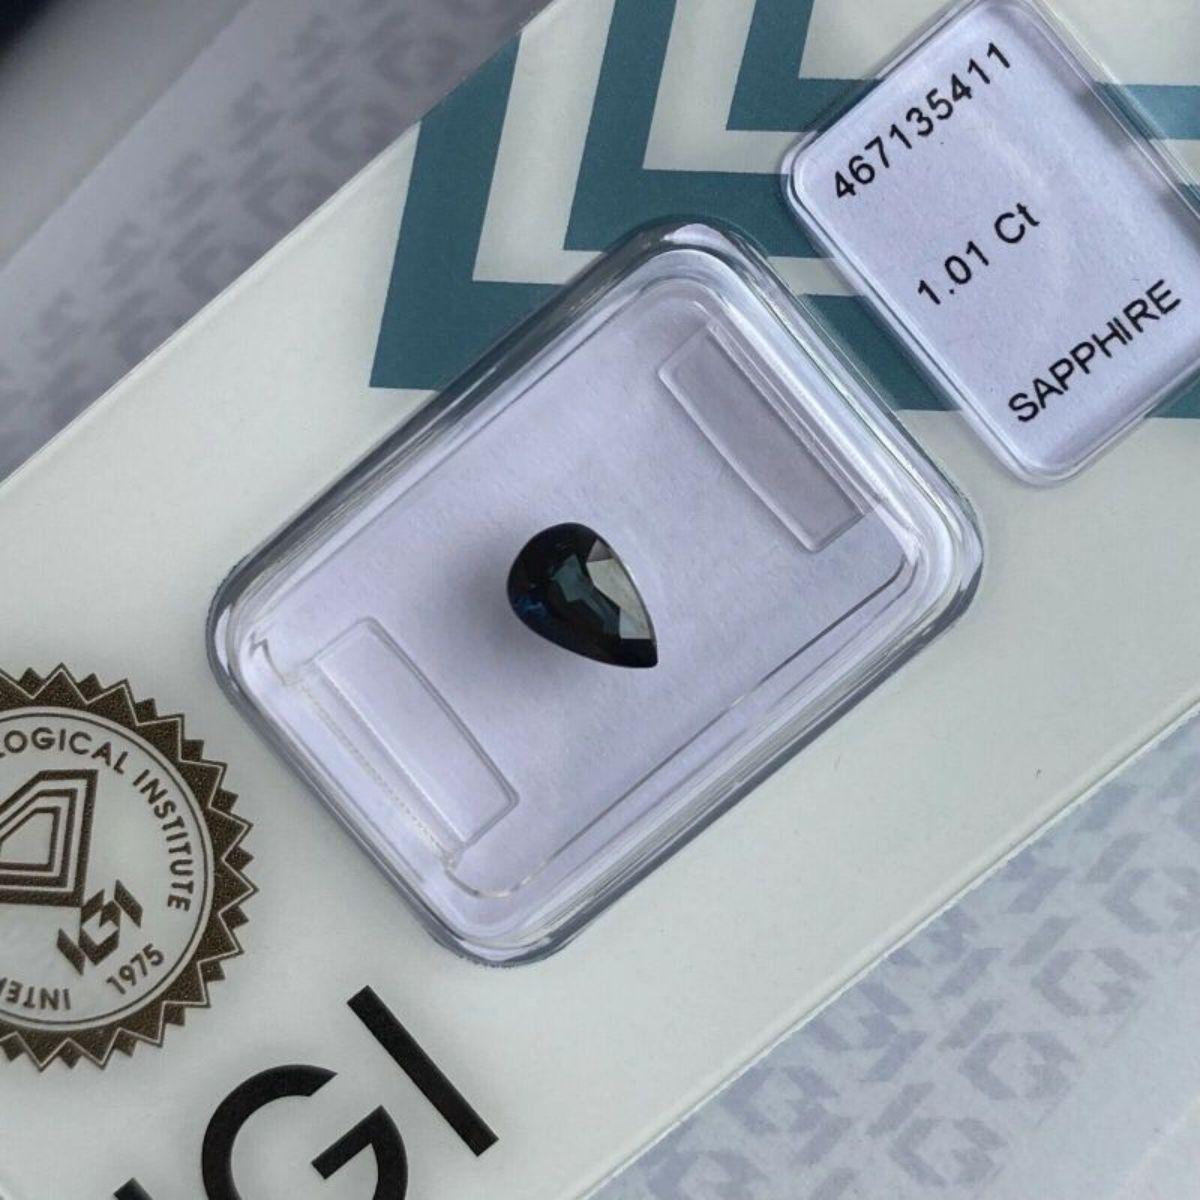 Fine 1.01ct Deep Green Blue Untreated Sapphire Pear Teardrop Cut IGI Certified

Fine Deep Green Blue Sapphire In IGI Blister. 
1.01 Carat with an excellent pear teardrop cut and very good clarity, a very clean stone with only some small natural